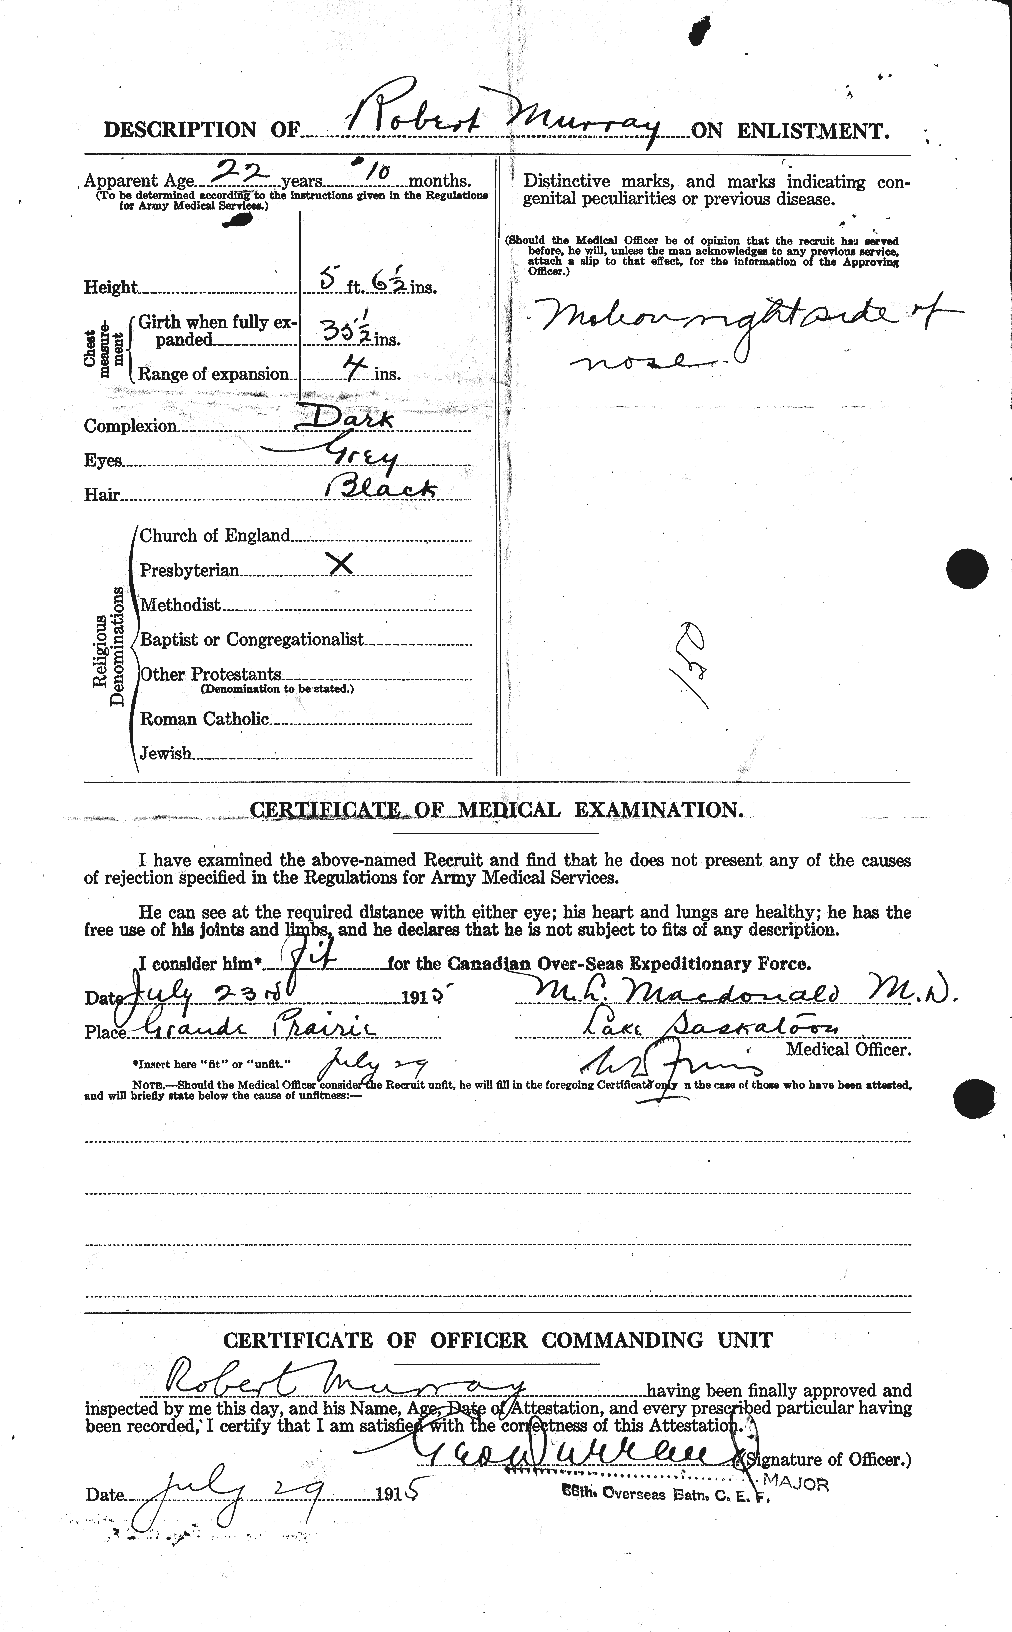 Personnel Records of the First World War - CEF 514049b